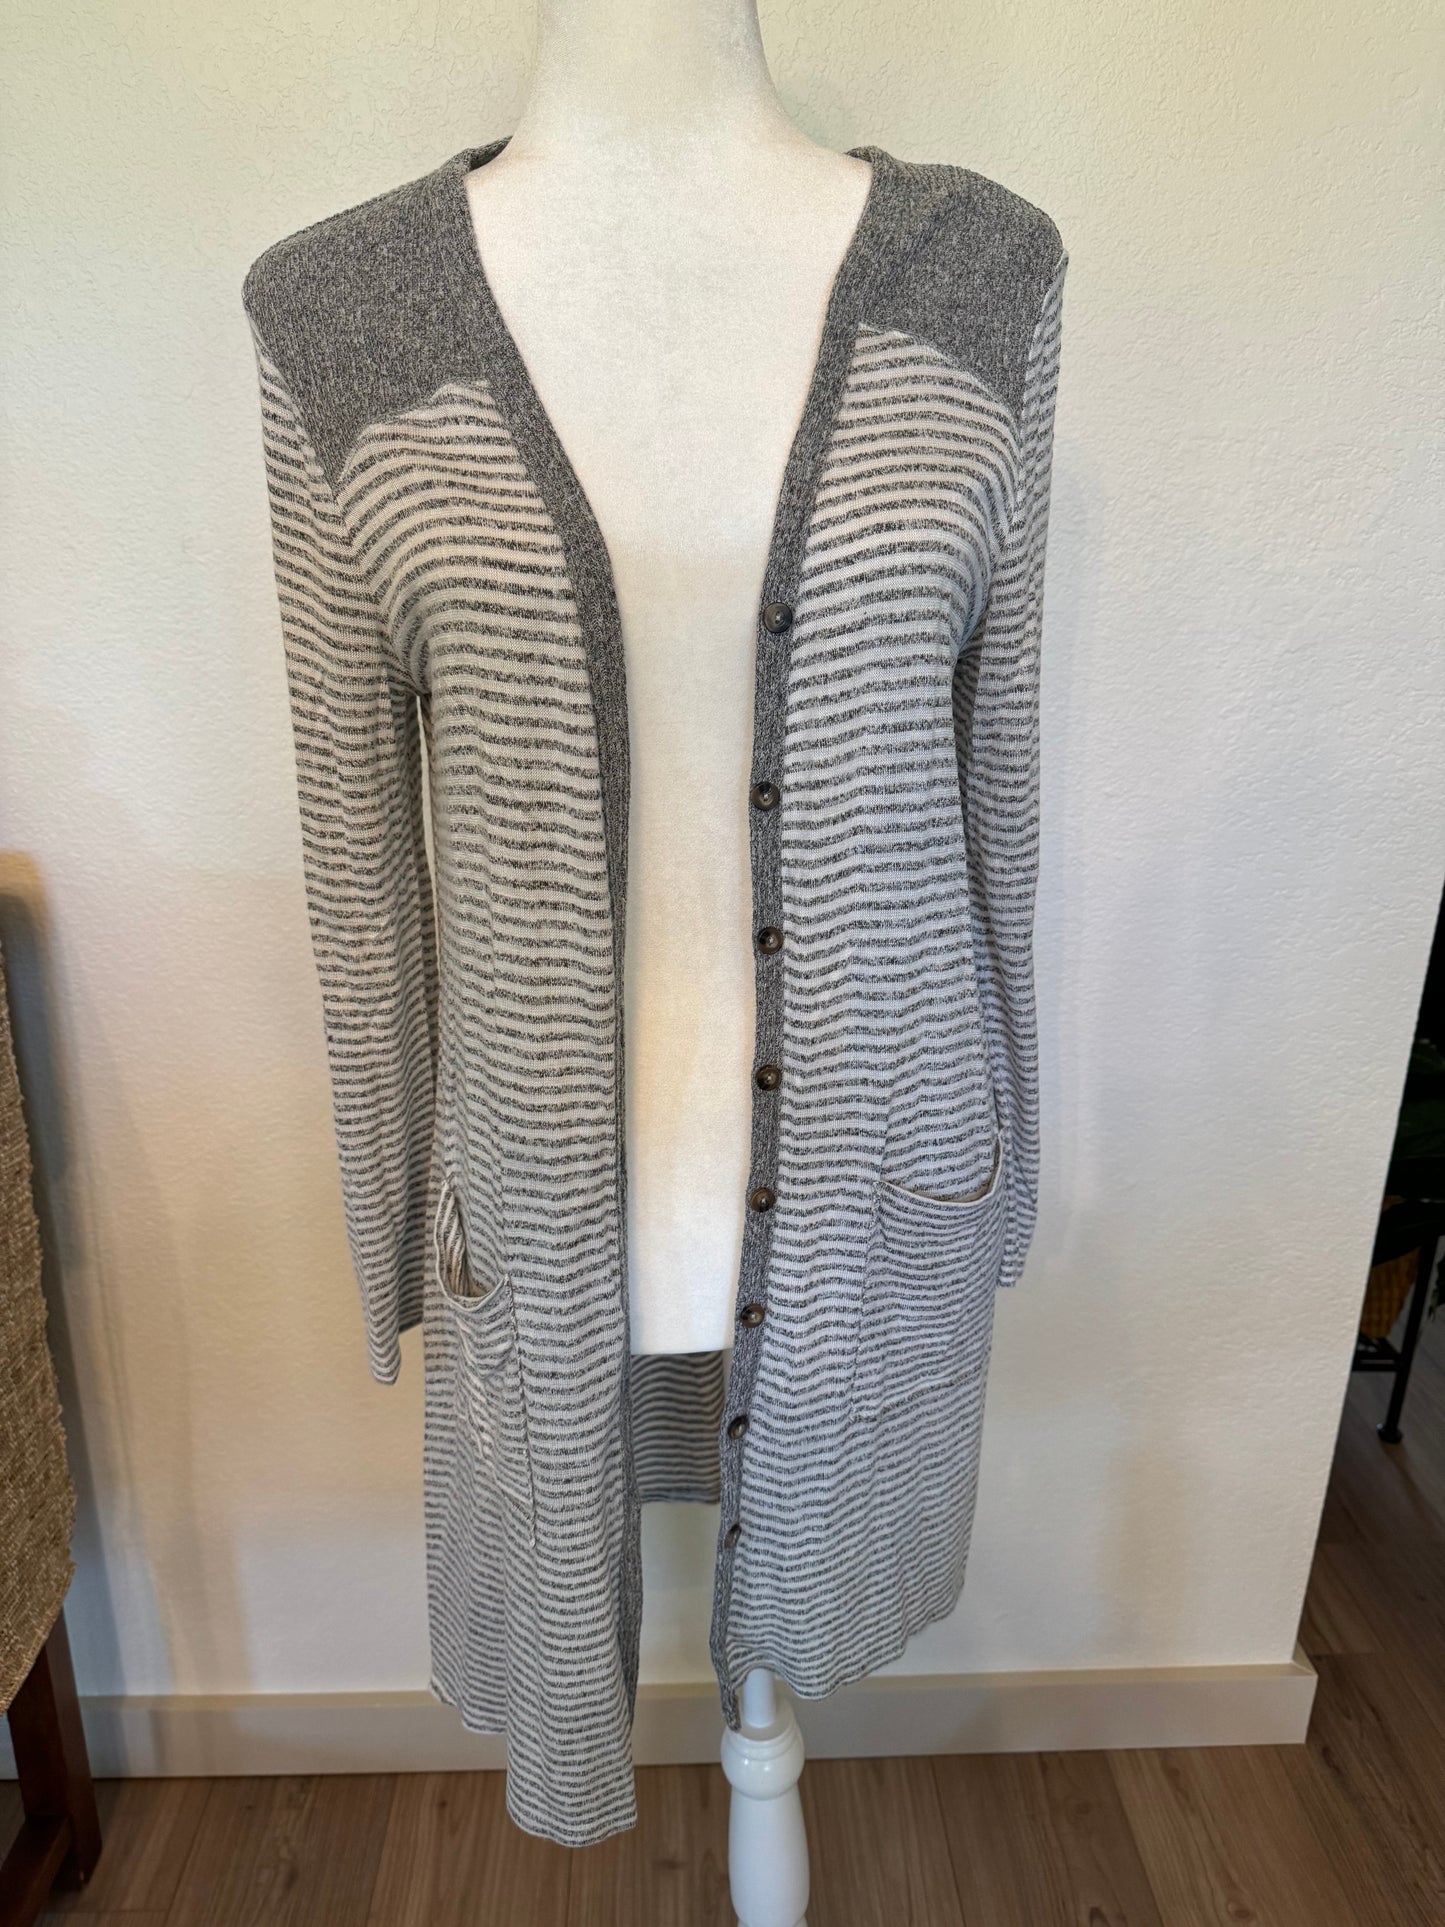 Maurice’s Gray and White Stripe Knit Cardigan